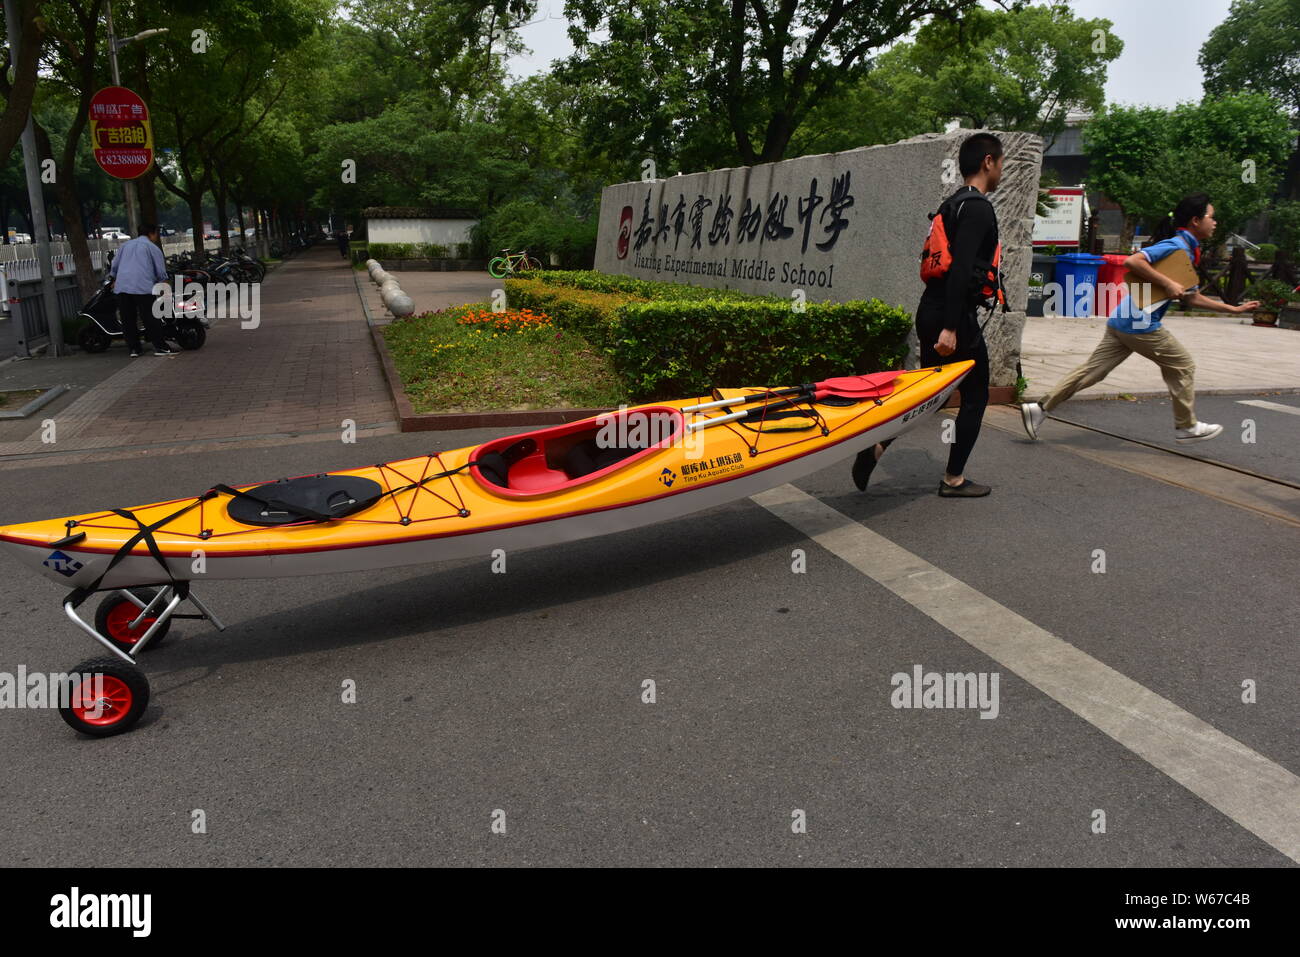 34-year-old Chinese gym teacher Sun Hua drags his boat after boating on a river as he arrives at school in Jiaxing city, east China's Zhejiang provinc Stock Photo